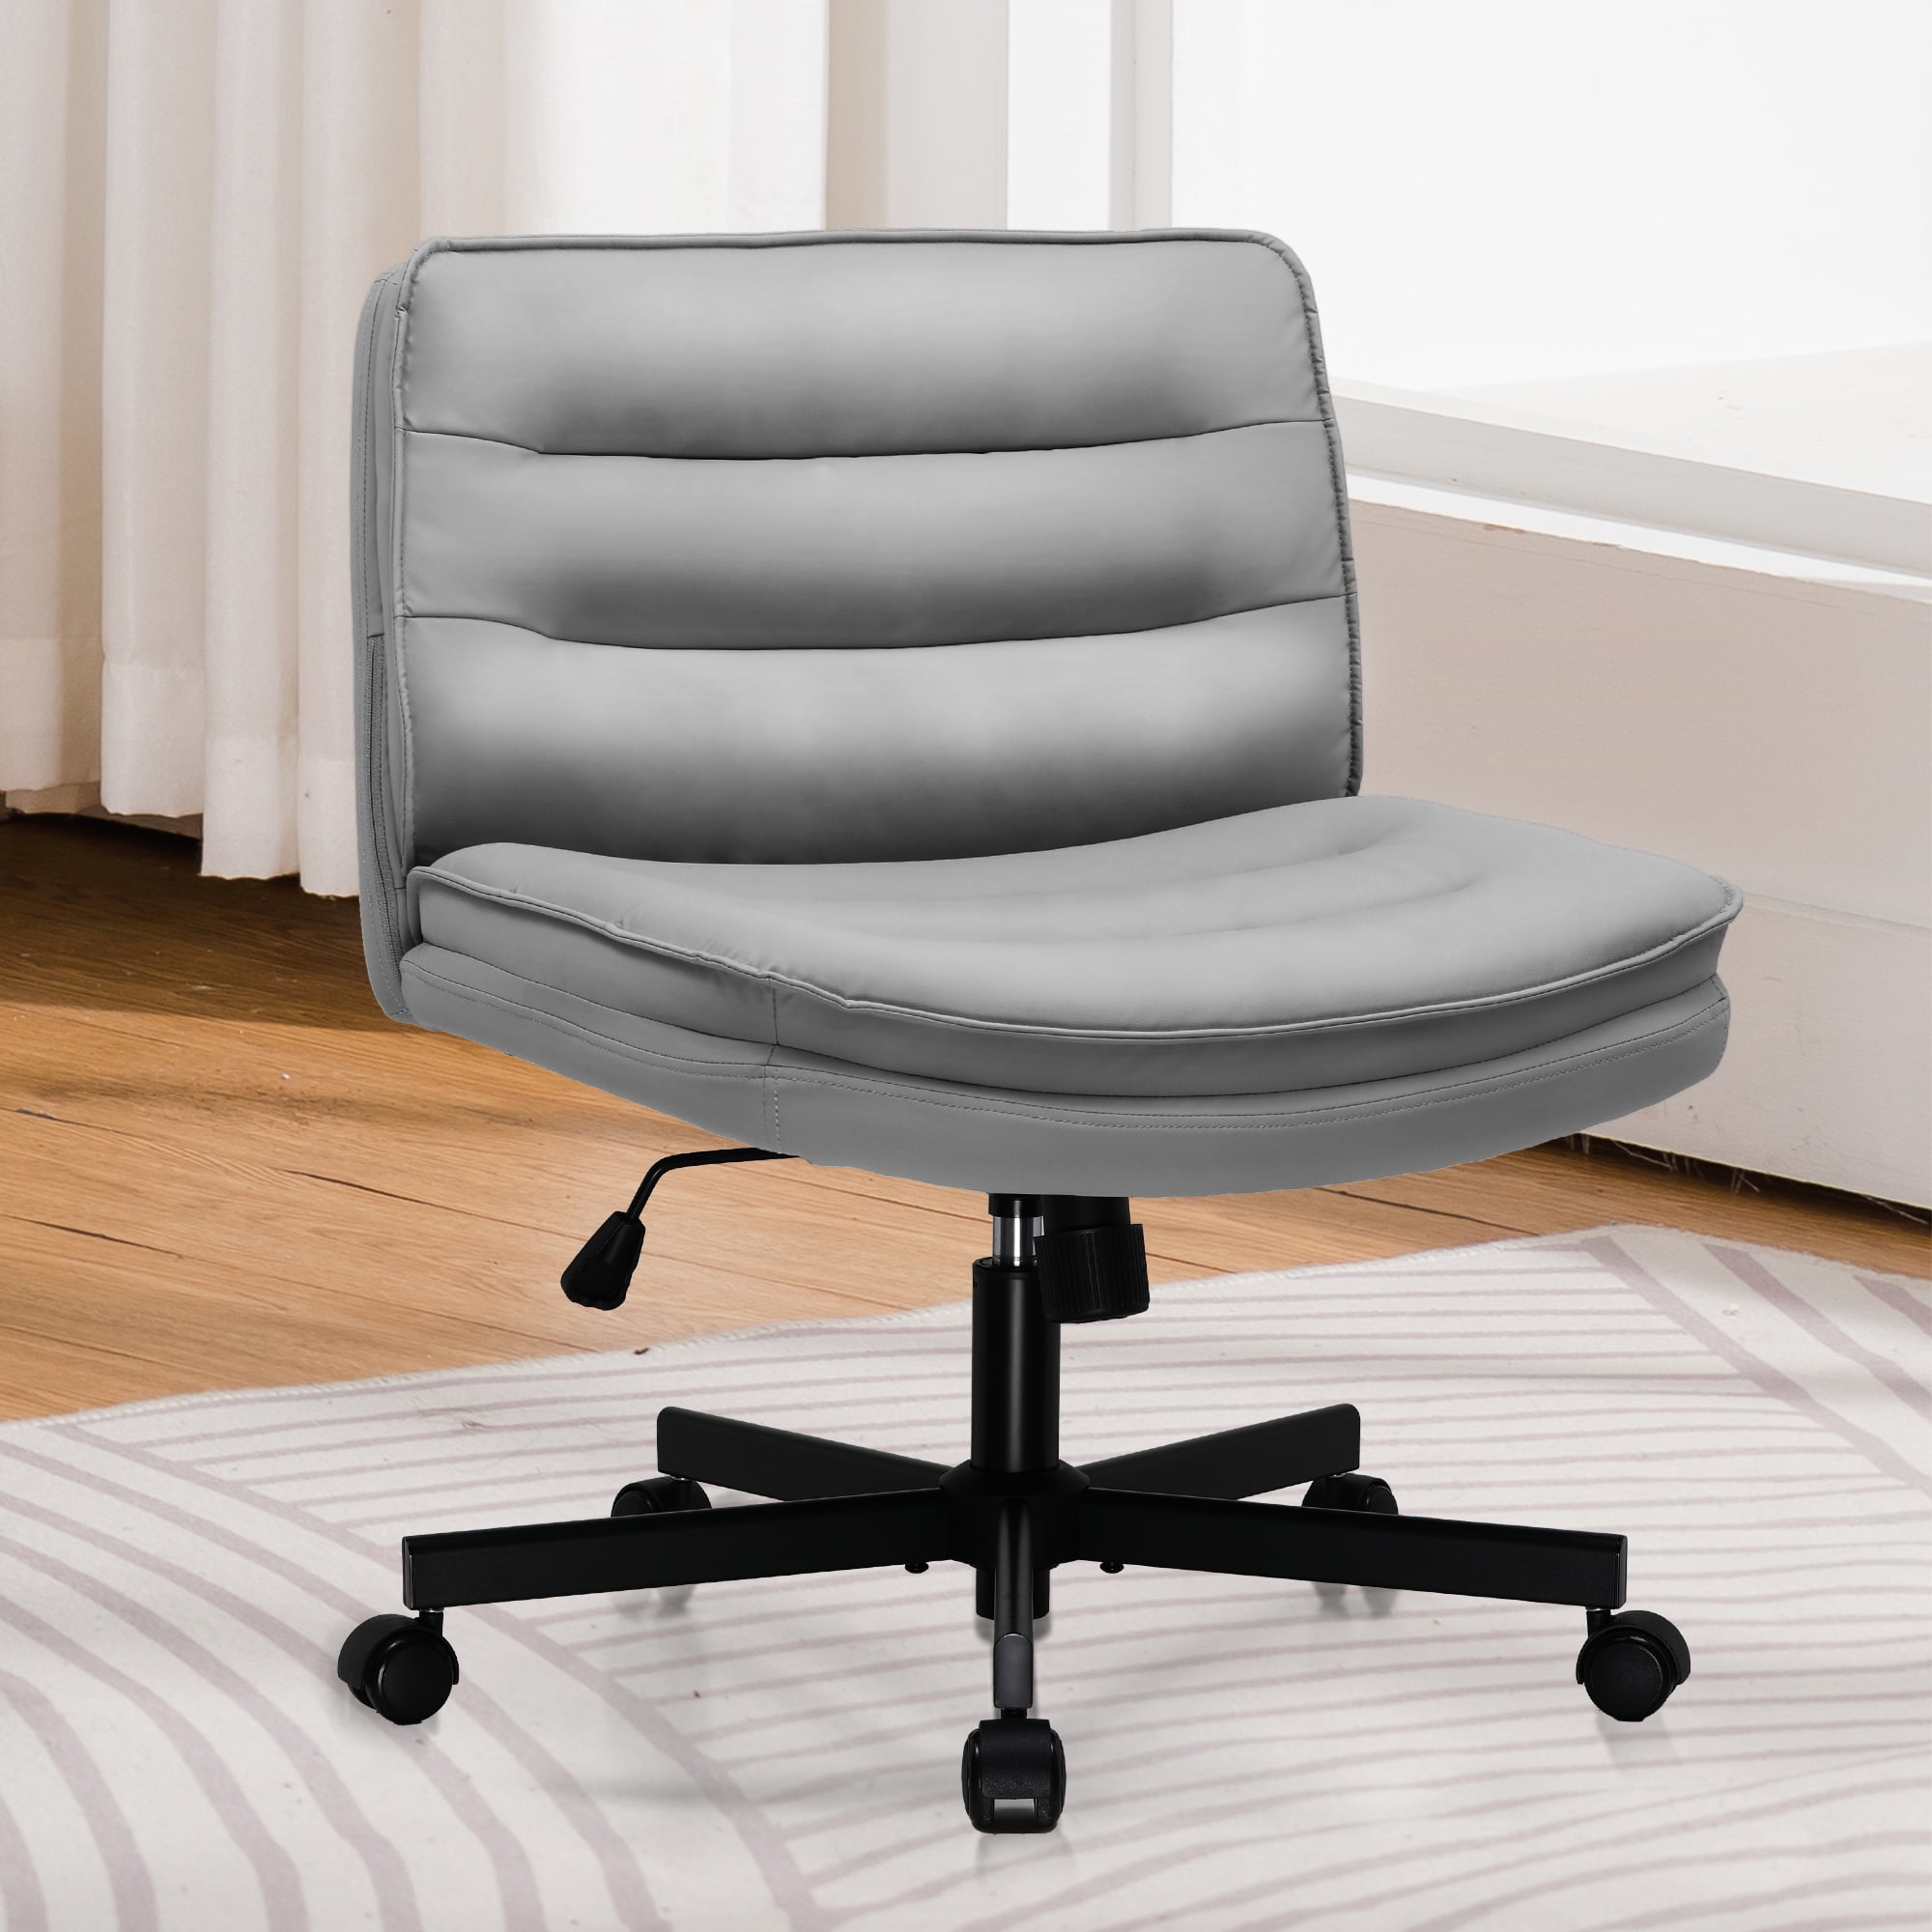 COMHOMA Armless Office Desk Chair with Wheels, Fabric Padded Cross ...